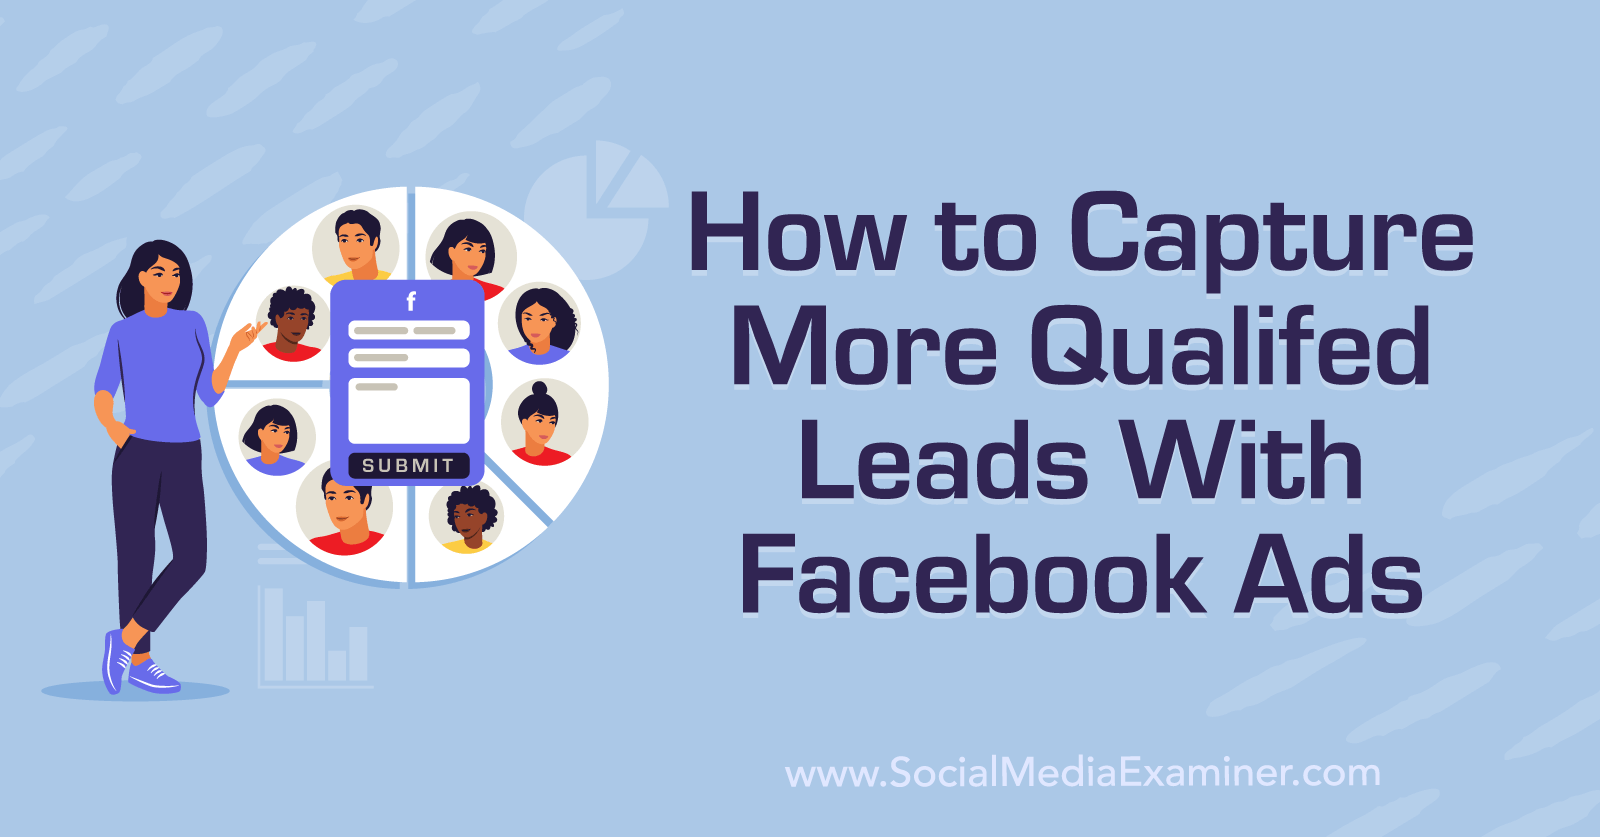 How to Capture More Qualified Leads With Facebook Ads by Social Media Examiner